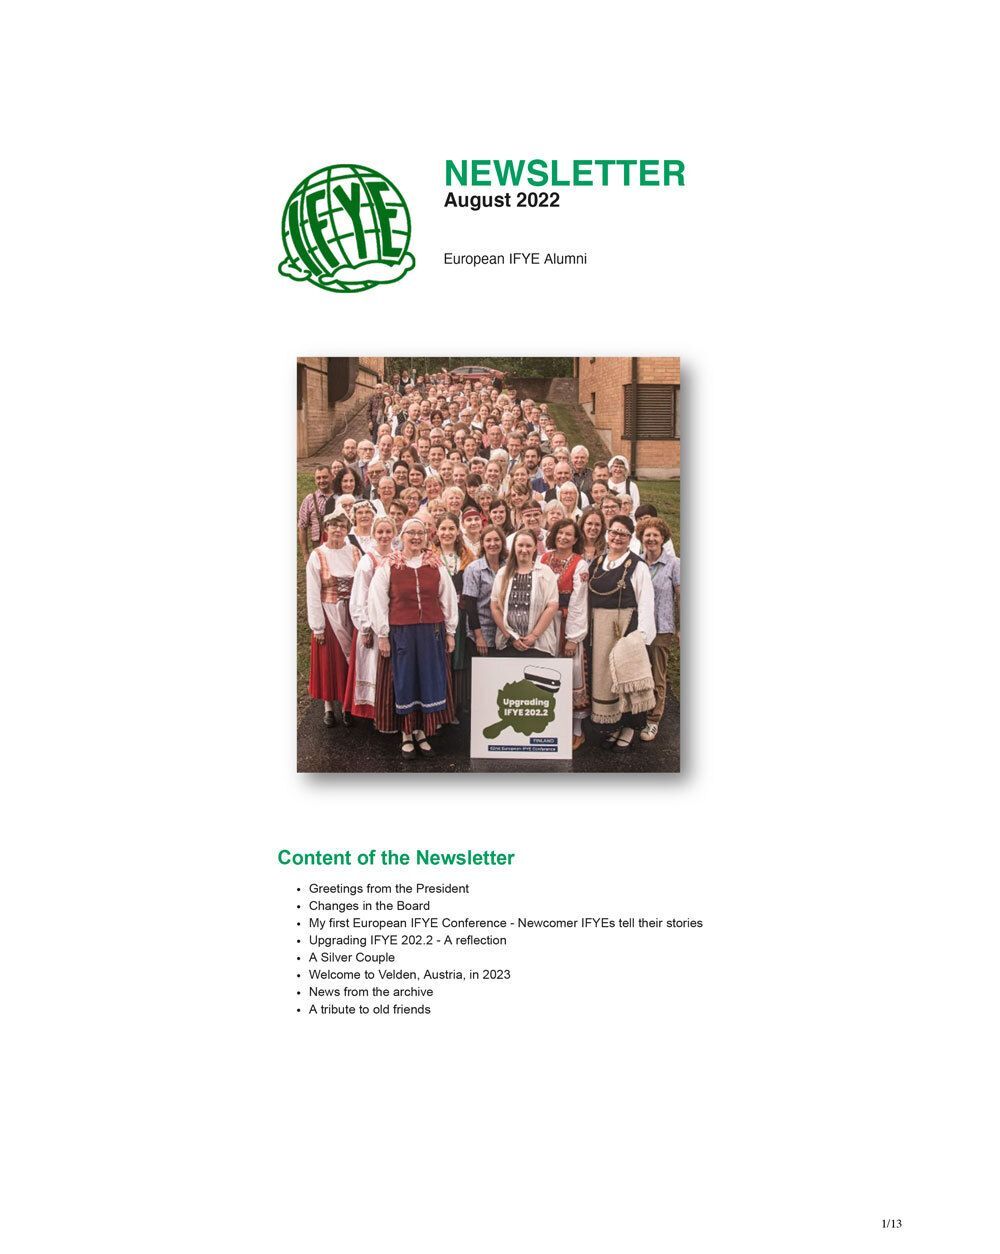 Read the Global Newsletter August 2022